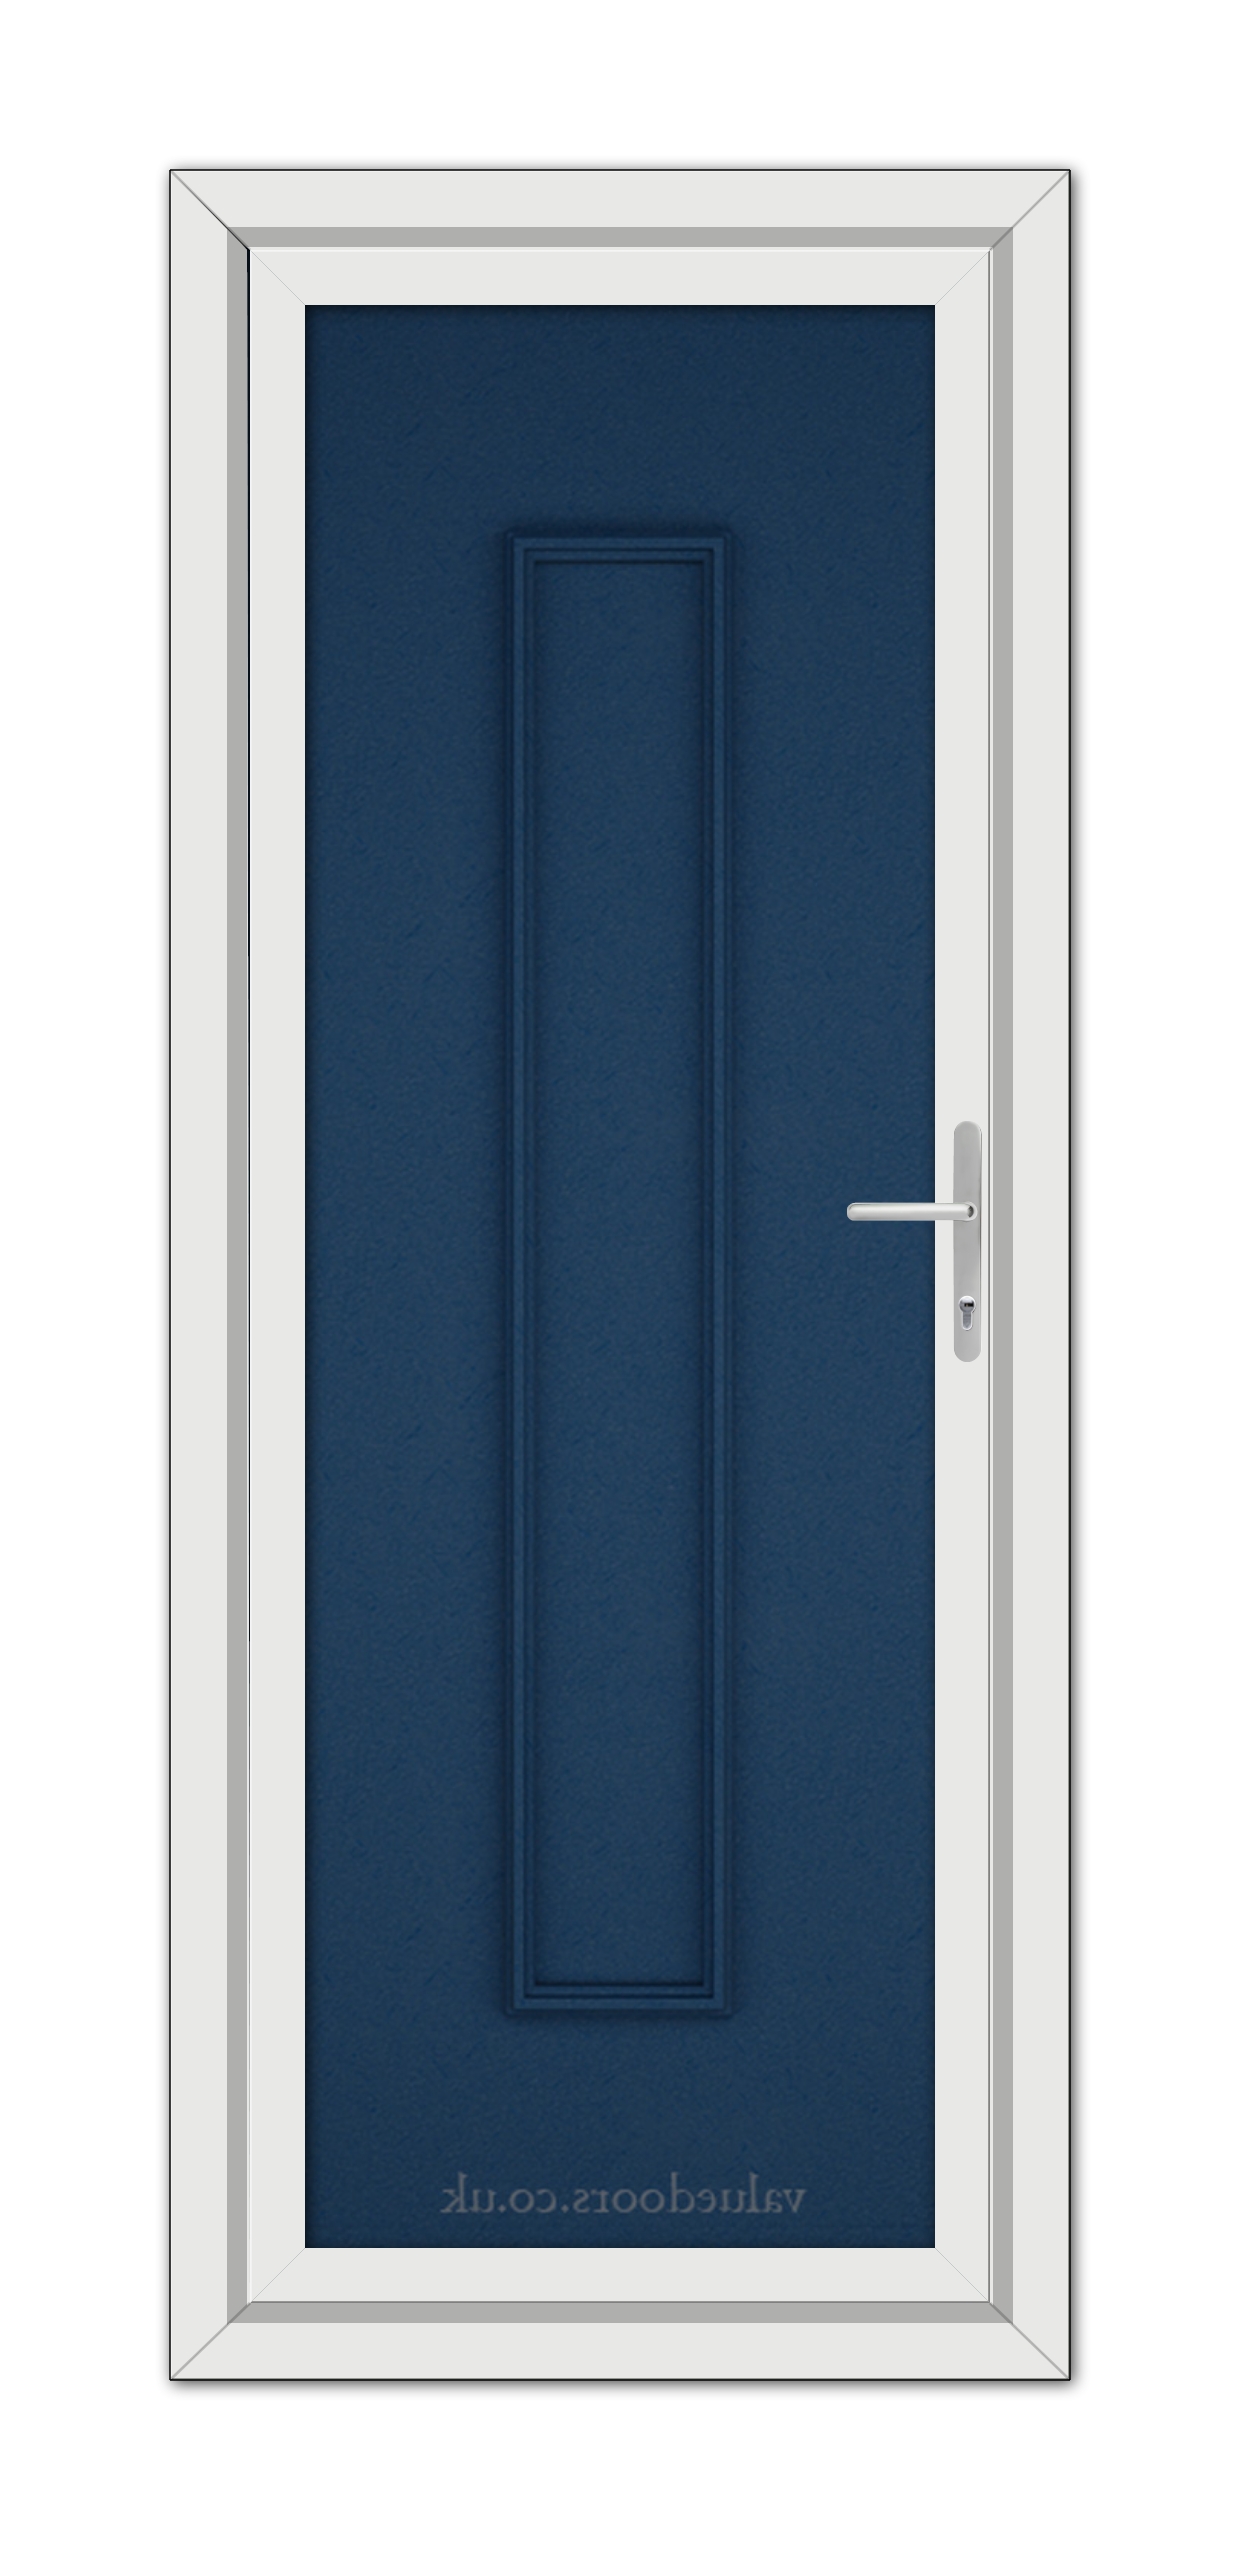 A vertical image of a closed Blue Rome Solid uPVC door within a white frame, featuring a slim rectangular panel and a metal handle on the right side.